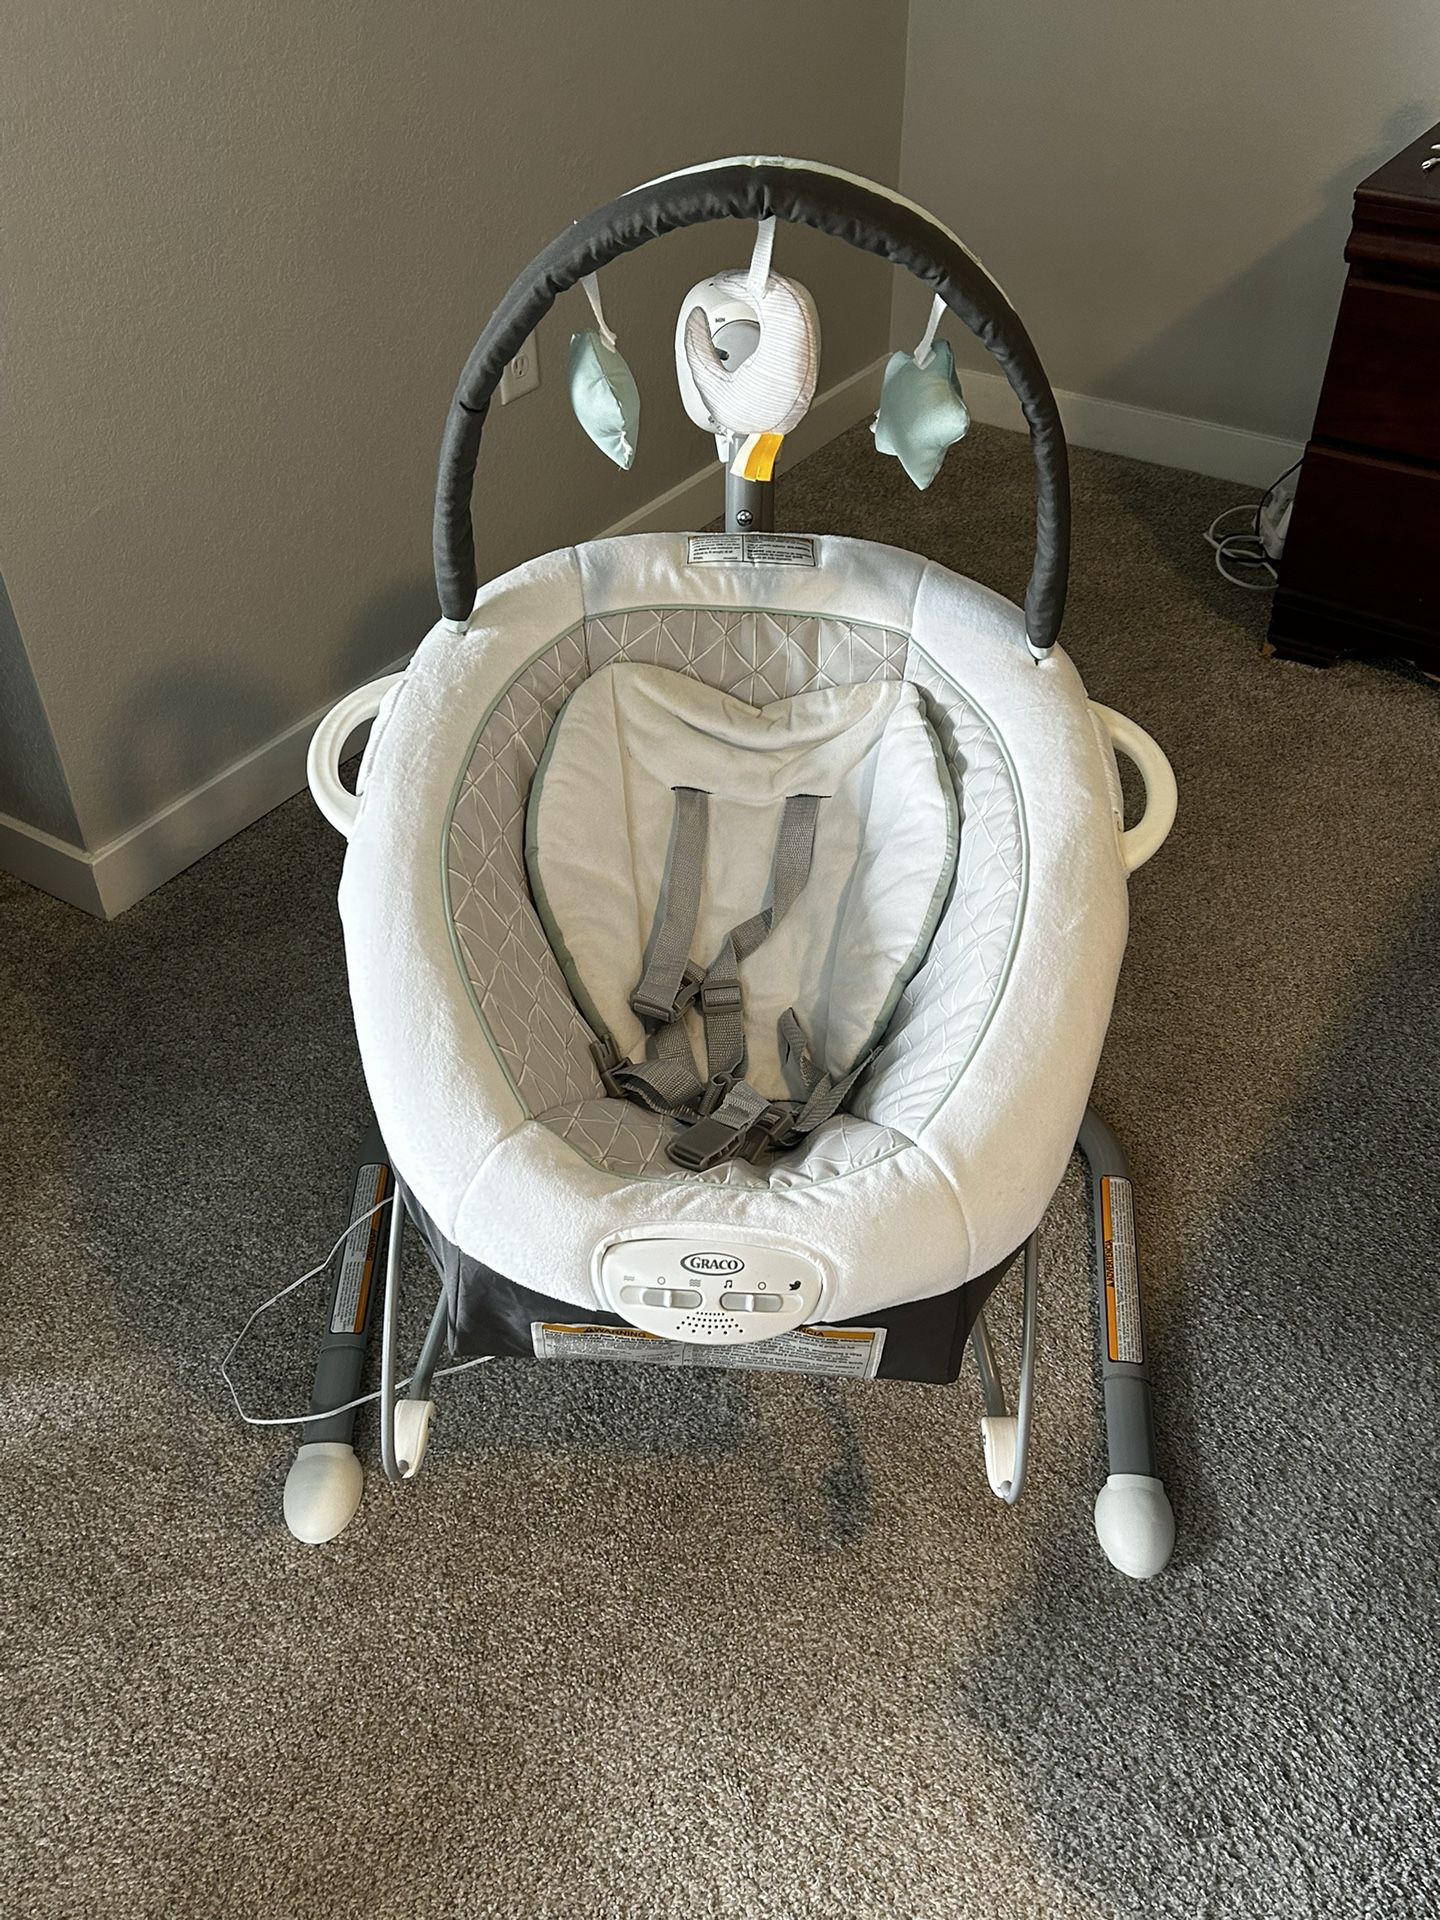 Graco Soothe N Sway LX Swing With Portable Bouncer